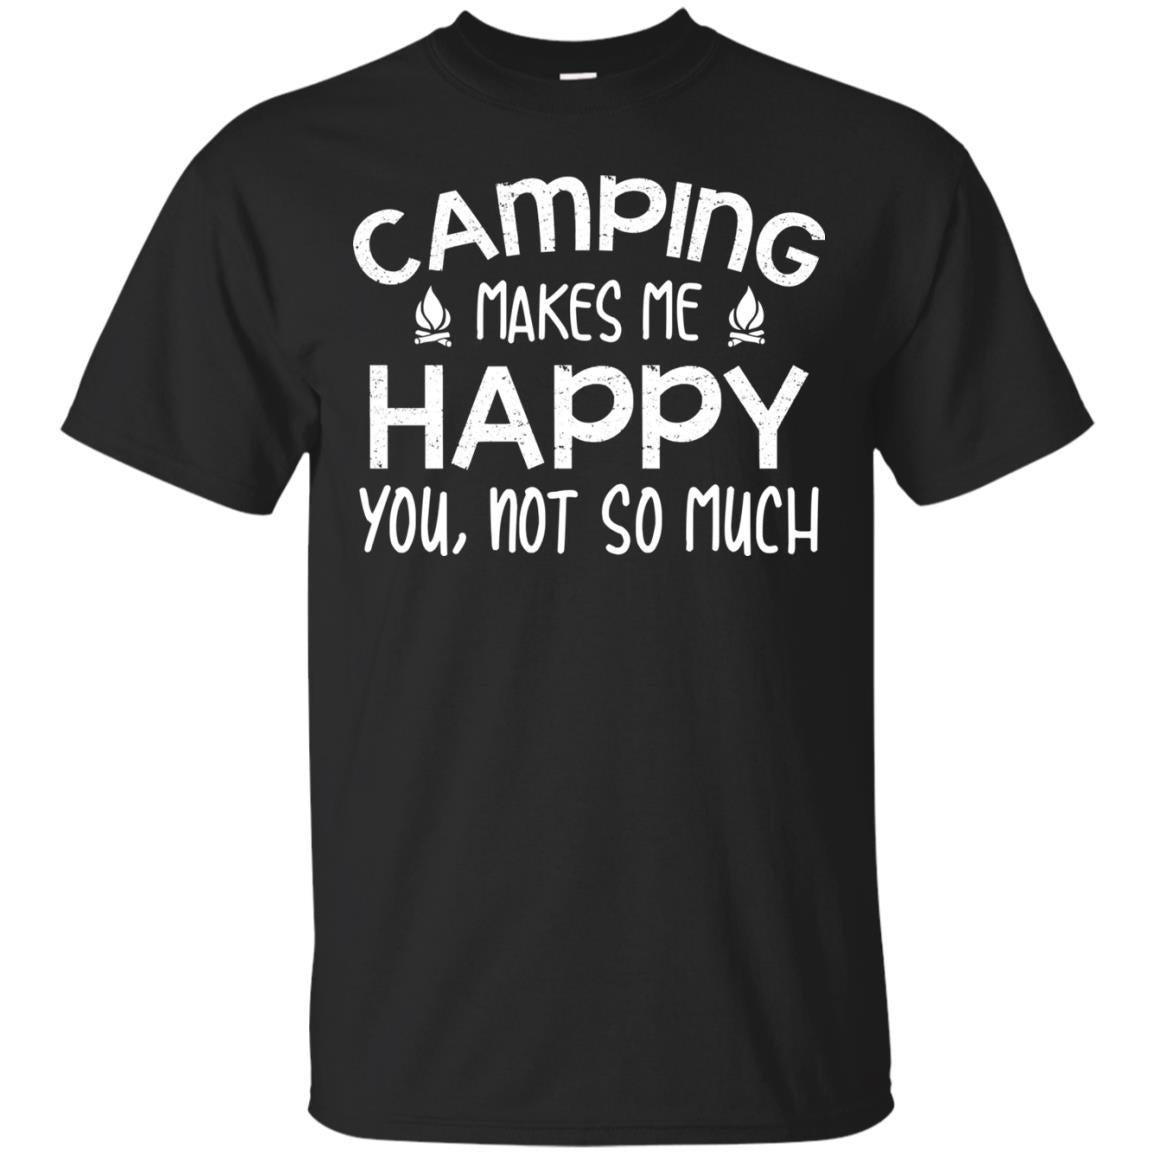 Camping Makes Me Happy You, Not So Much Camping Shirt For CamperG200 Gildan Ultra Cotton T-Shirt